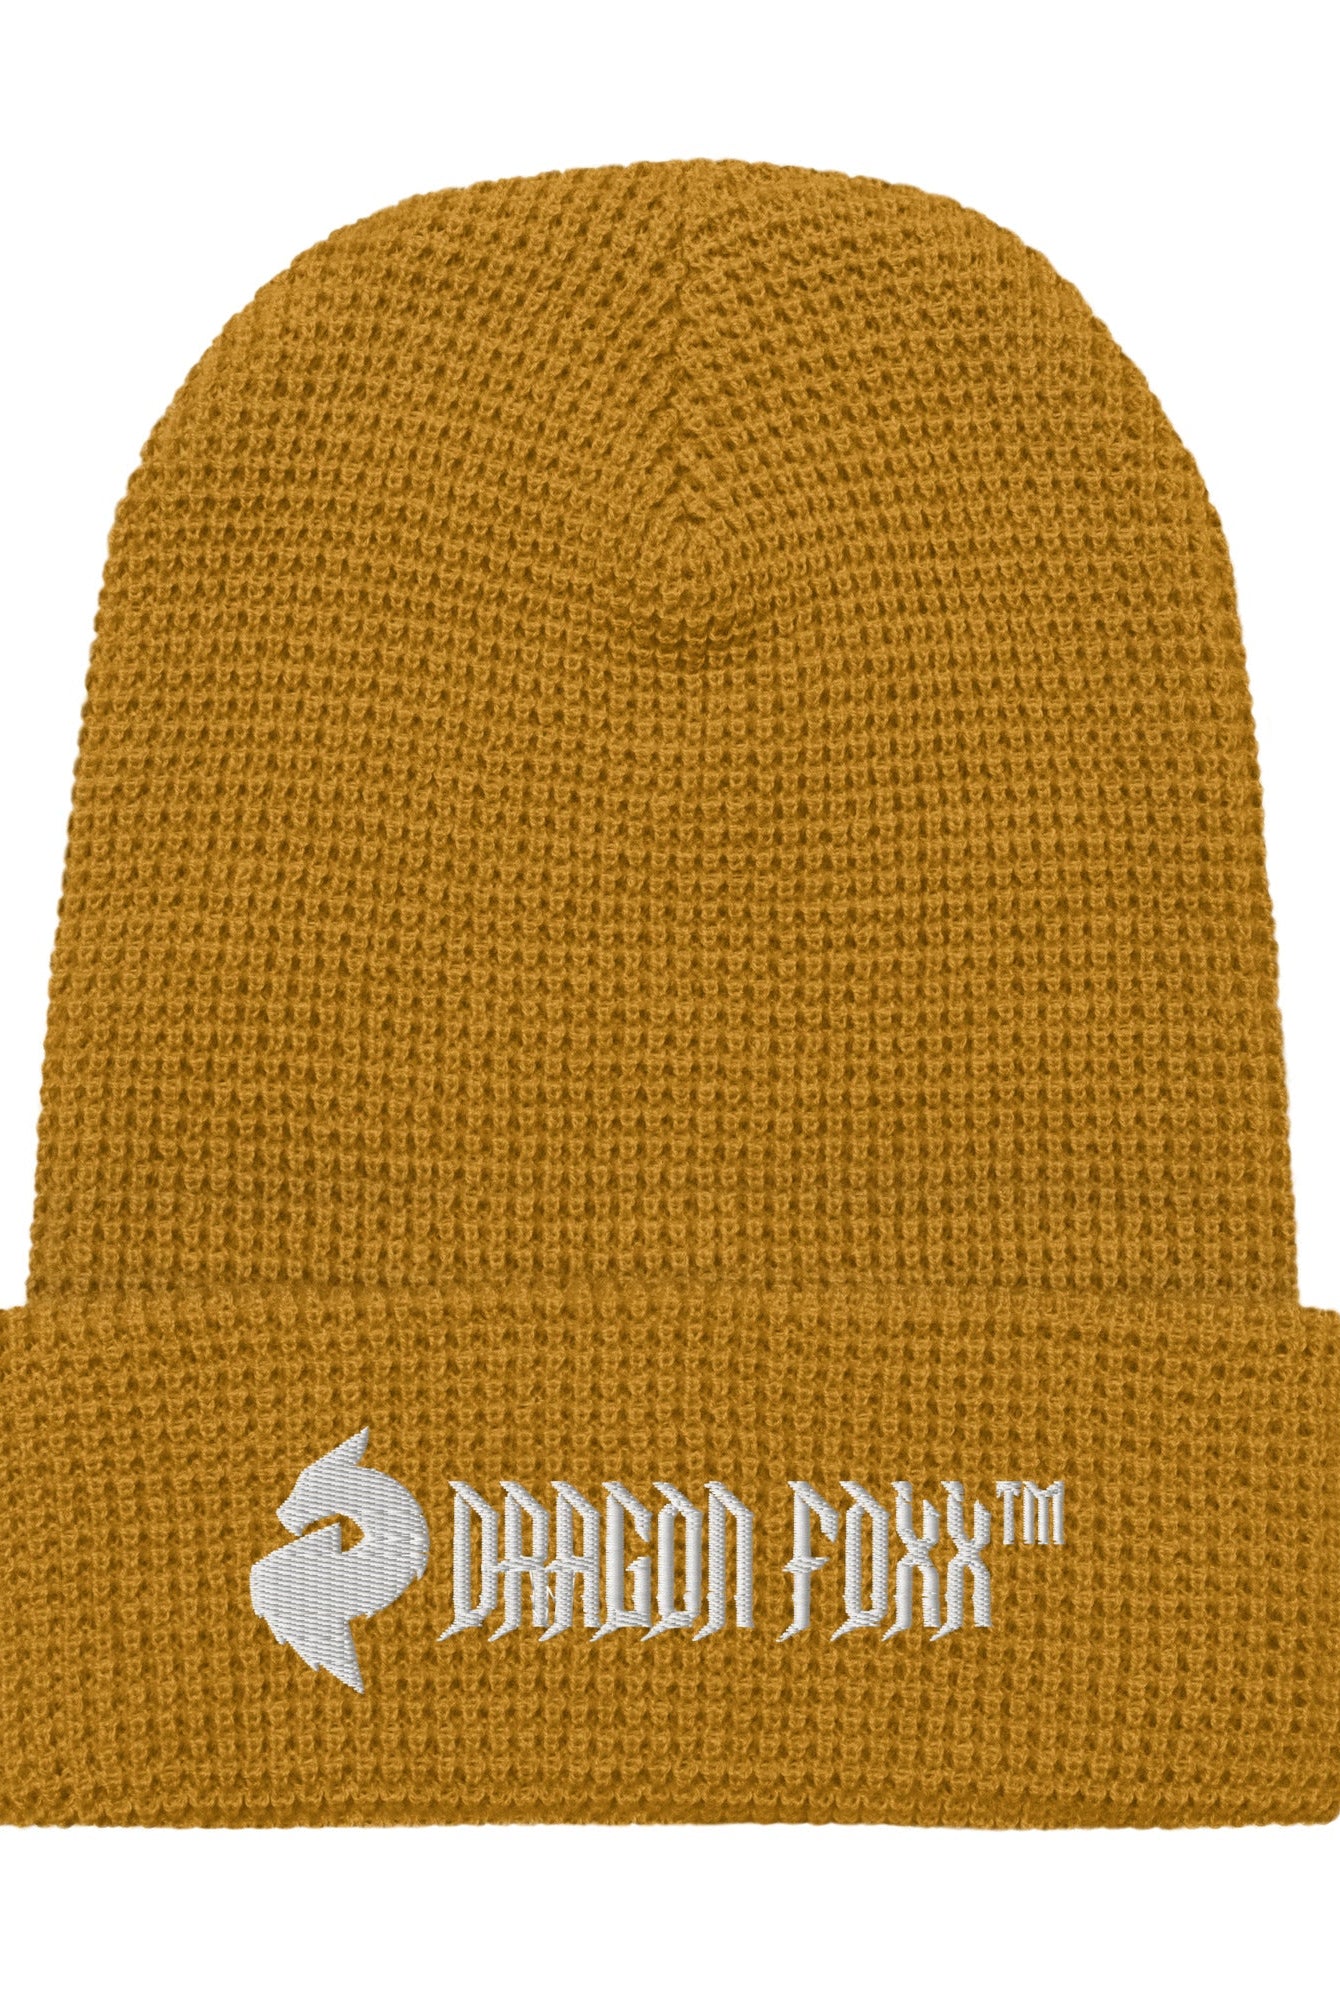 His or Hers Dragon Foxx™ Waffle beanie in 7 Colors - His or Hers Dragon Foxx™ Waffle beanie - DRAGON FOXX™ - His or Hers Dragon Foxx™ Waffle beanie in 7 Colors - 3986040_17448 - Camel - - Accessories - Beanie - Beanies